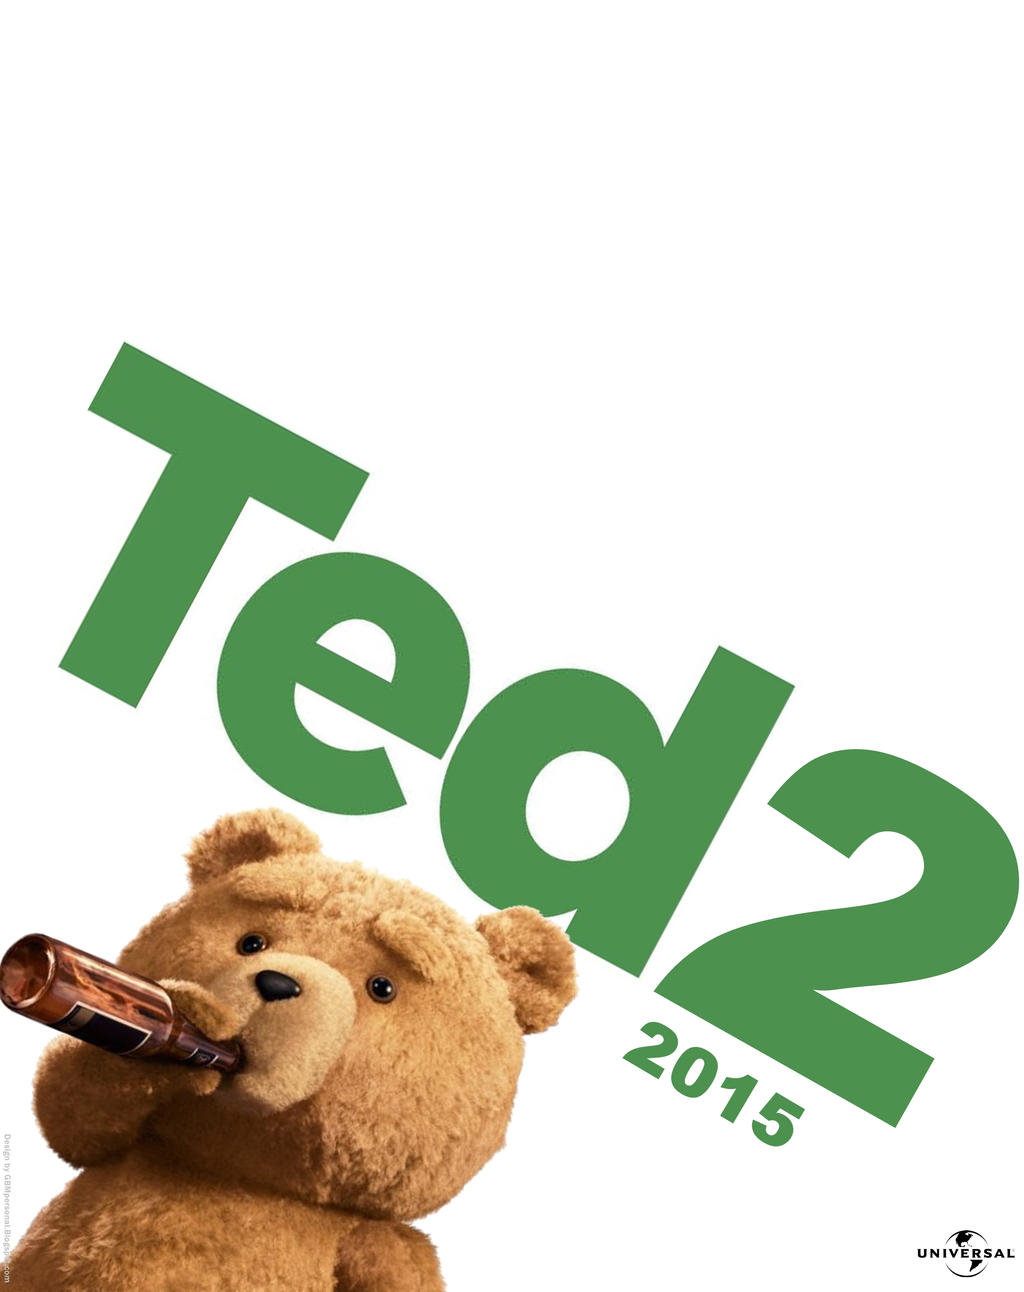 TED 2 is coming with Morgan Freeman joining the cast | MY GEZZA.COM